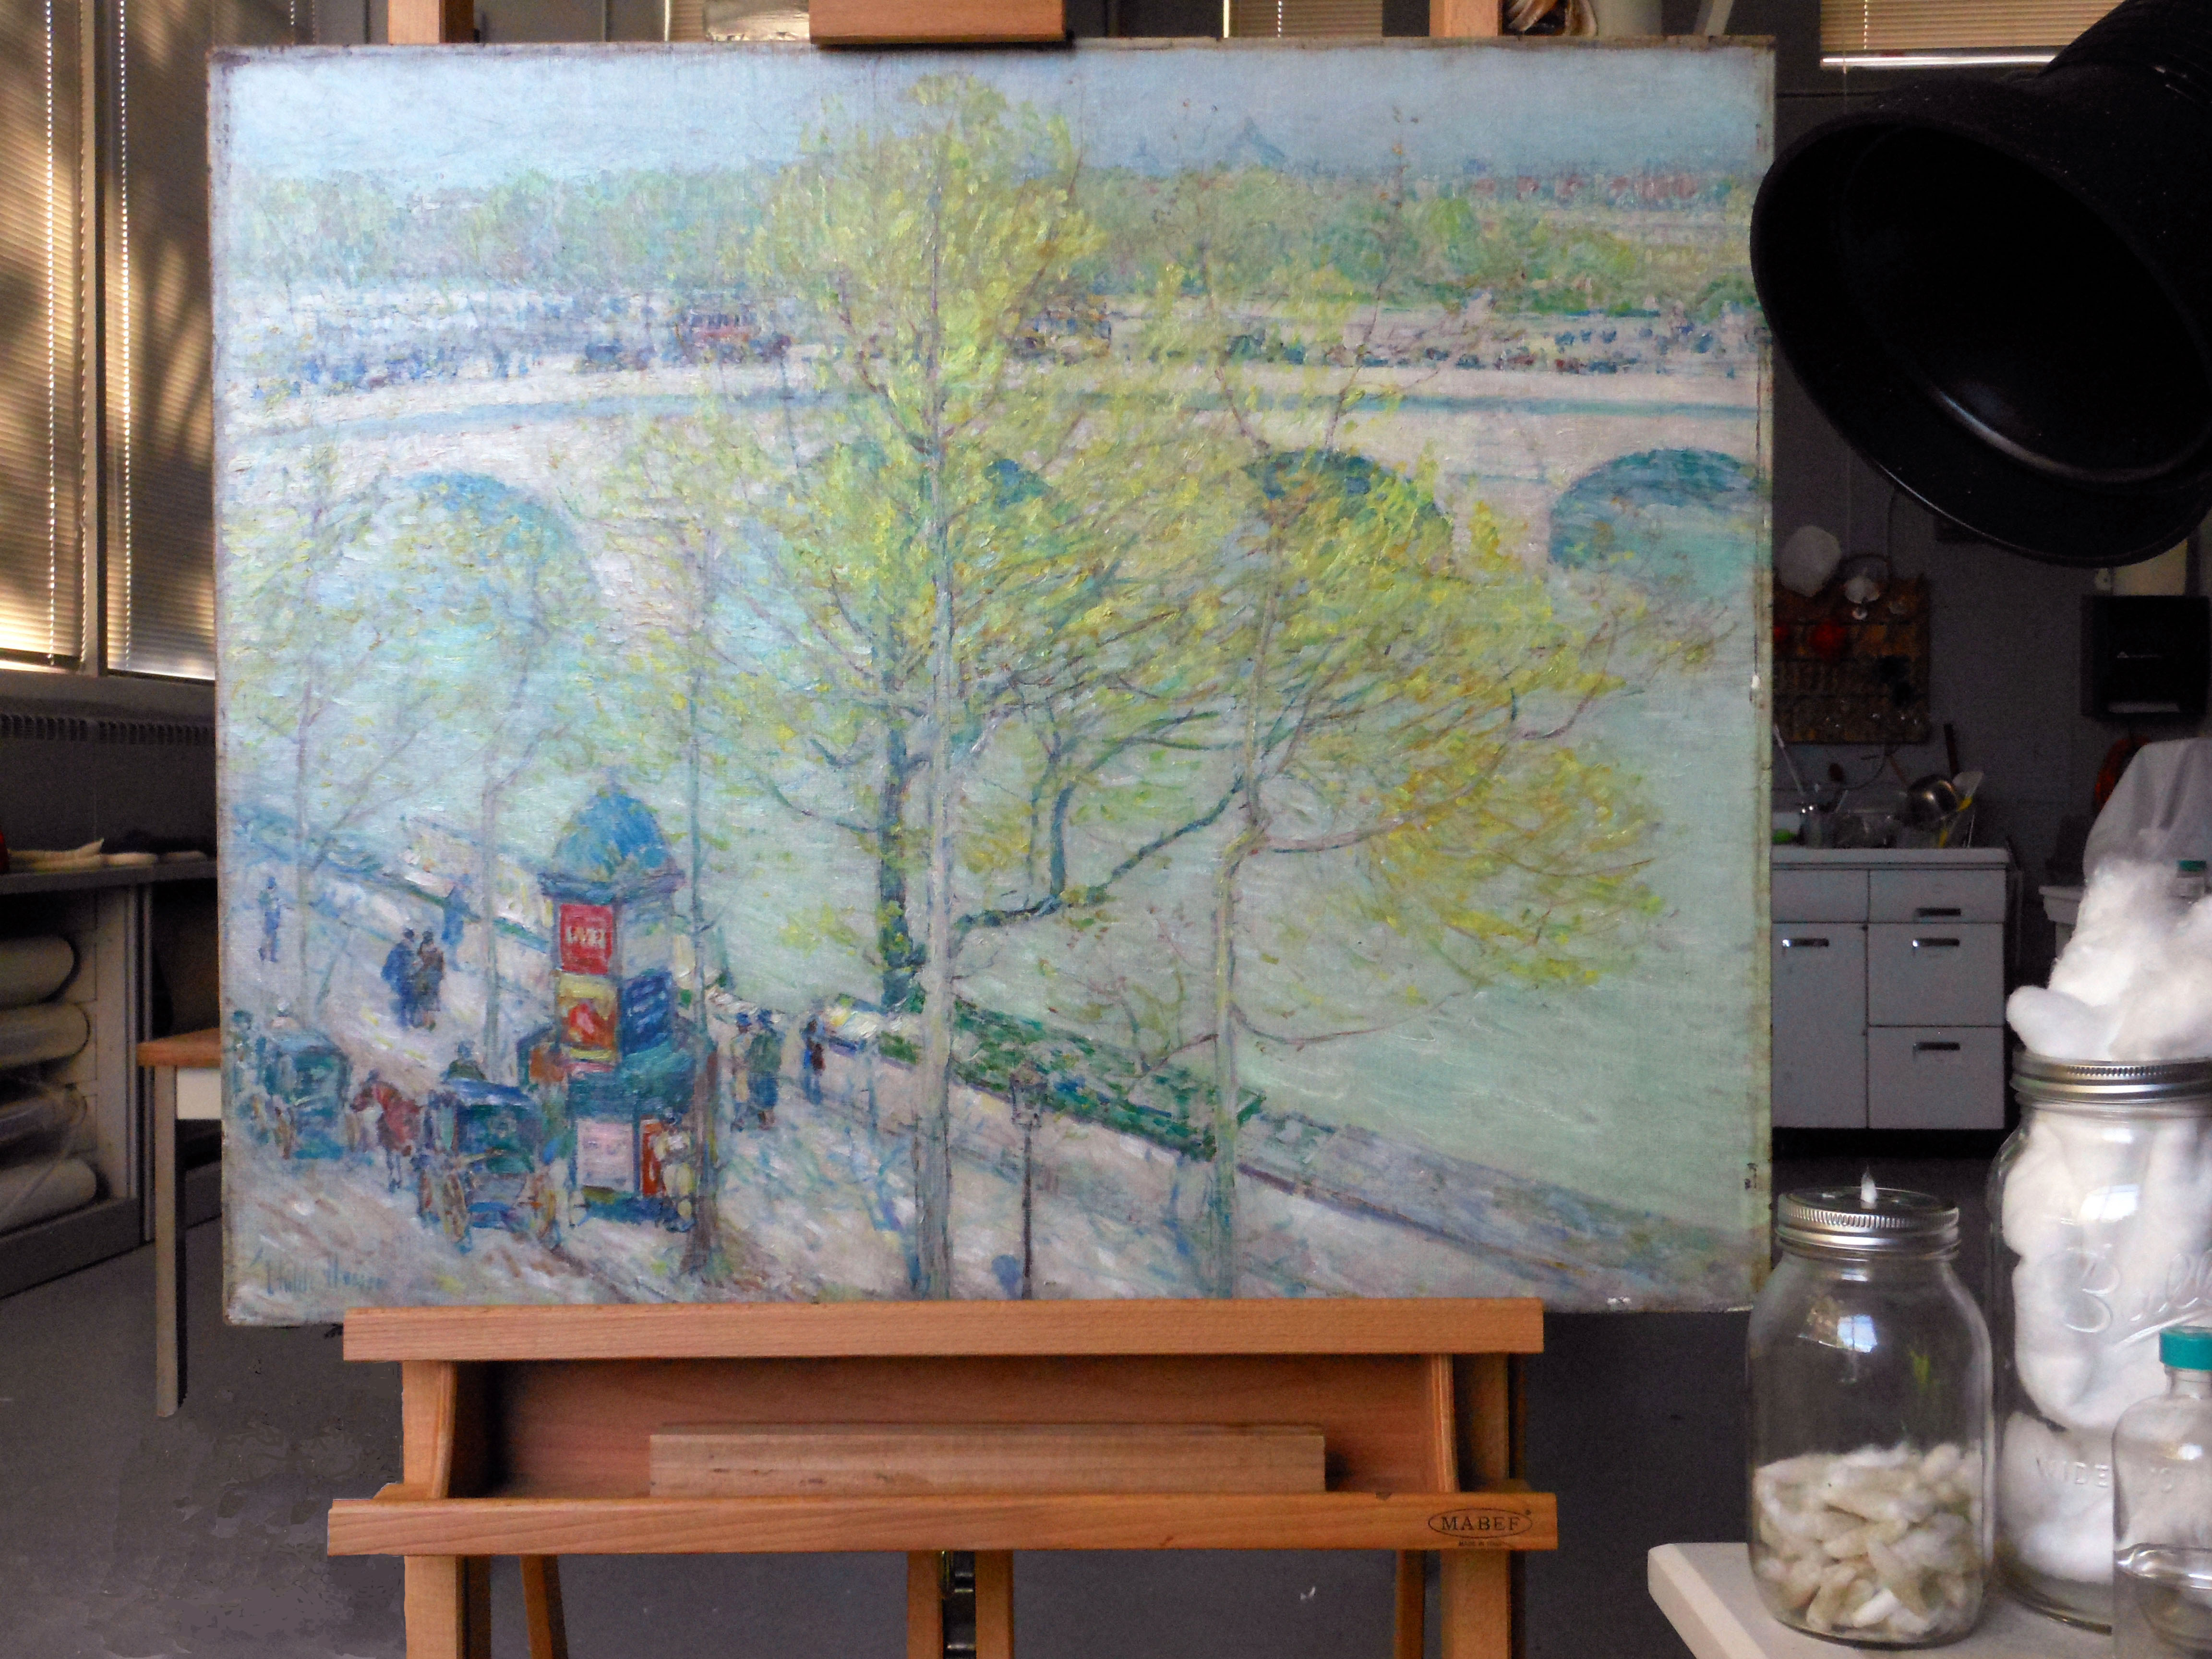 cleaning Pont Royal, Paris, a painting of Seine River